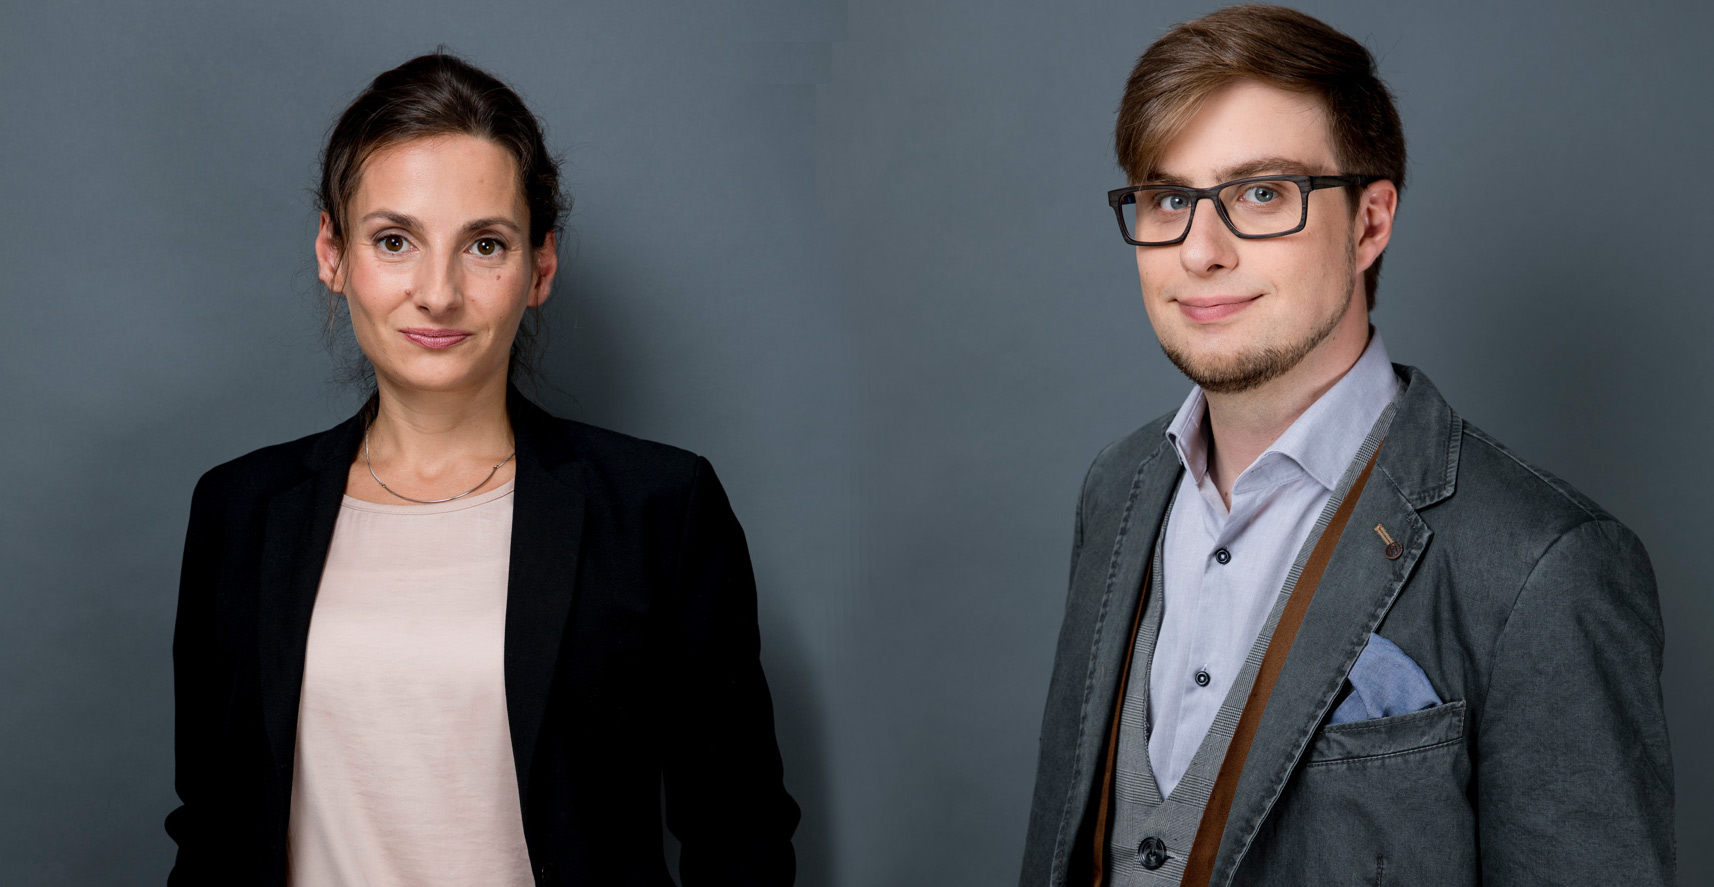 Committed to “Trusted Content”: Fink & Fuchs to rely on in-house journalist expertise